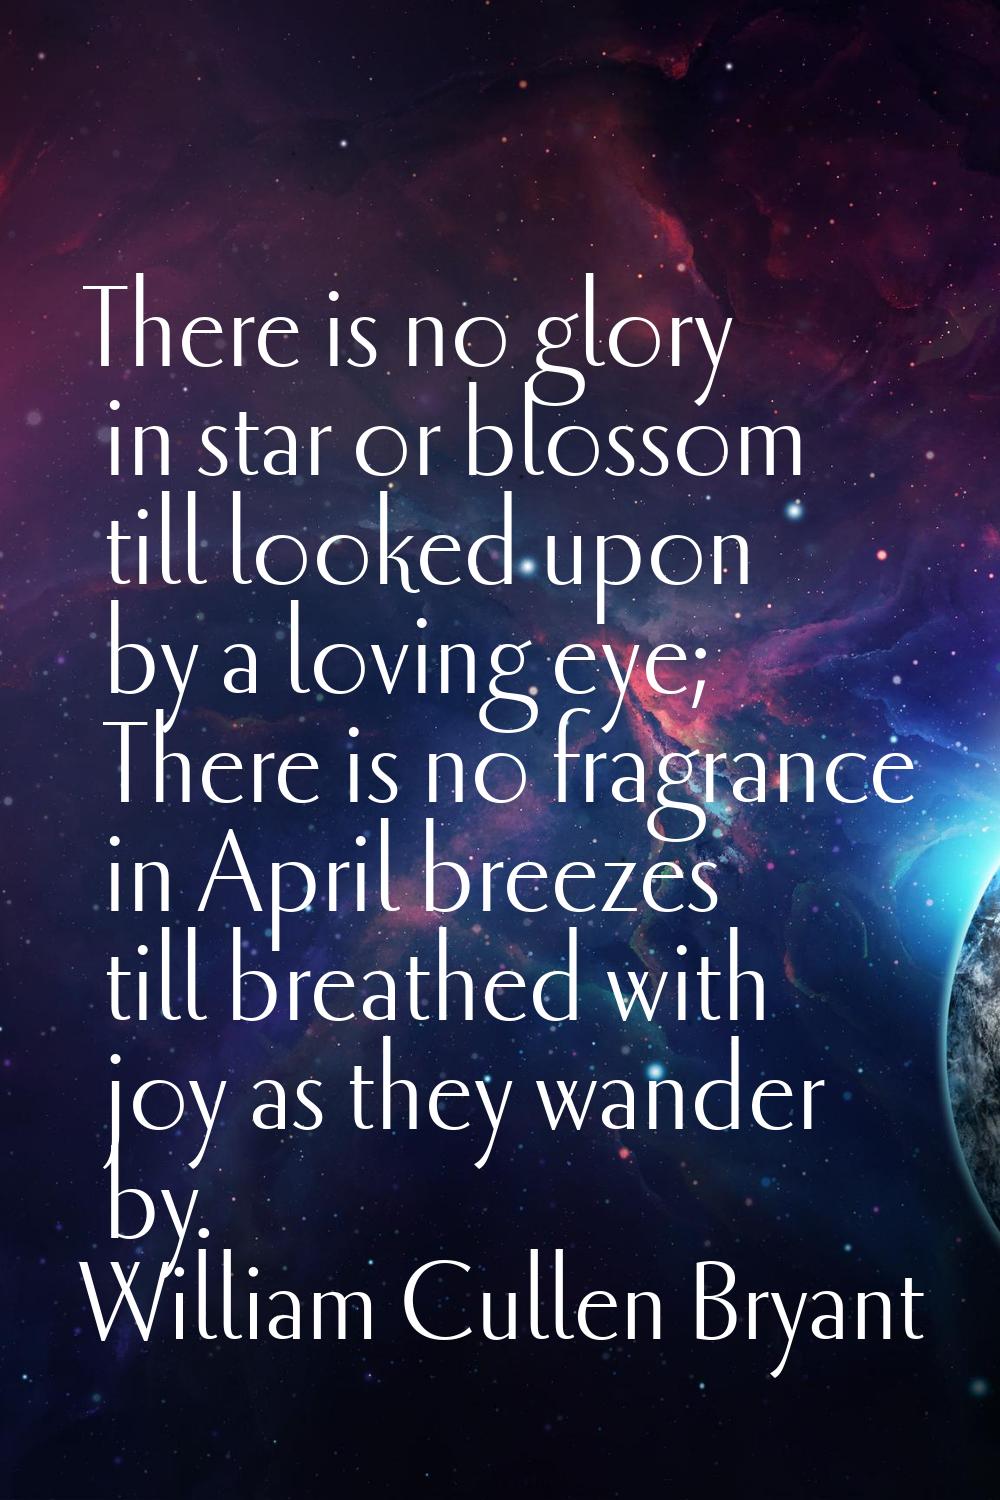 There is no glory in star or blossom till looked upon by a loving eye; There is no fragrance in Apr